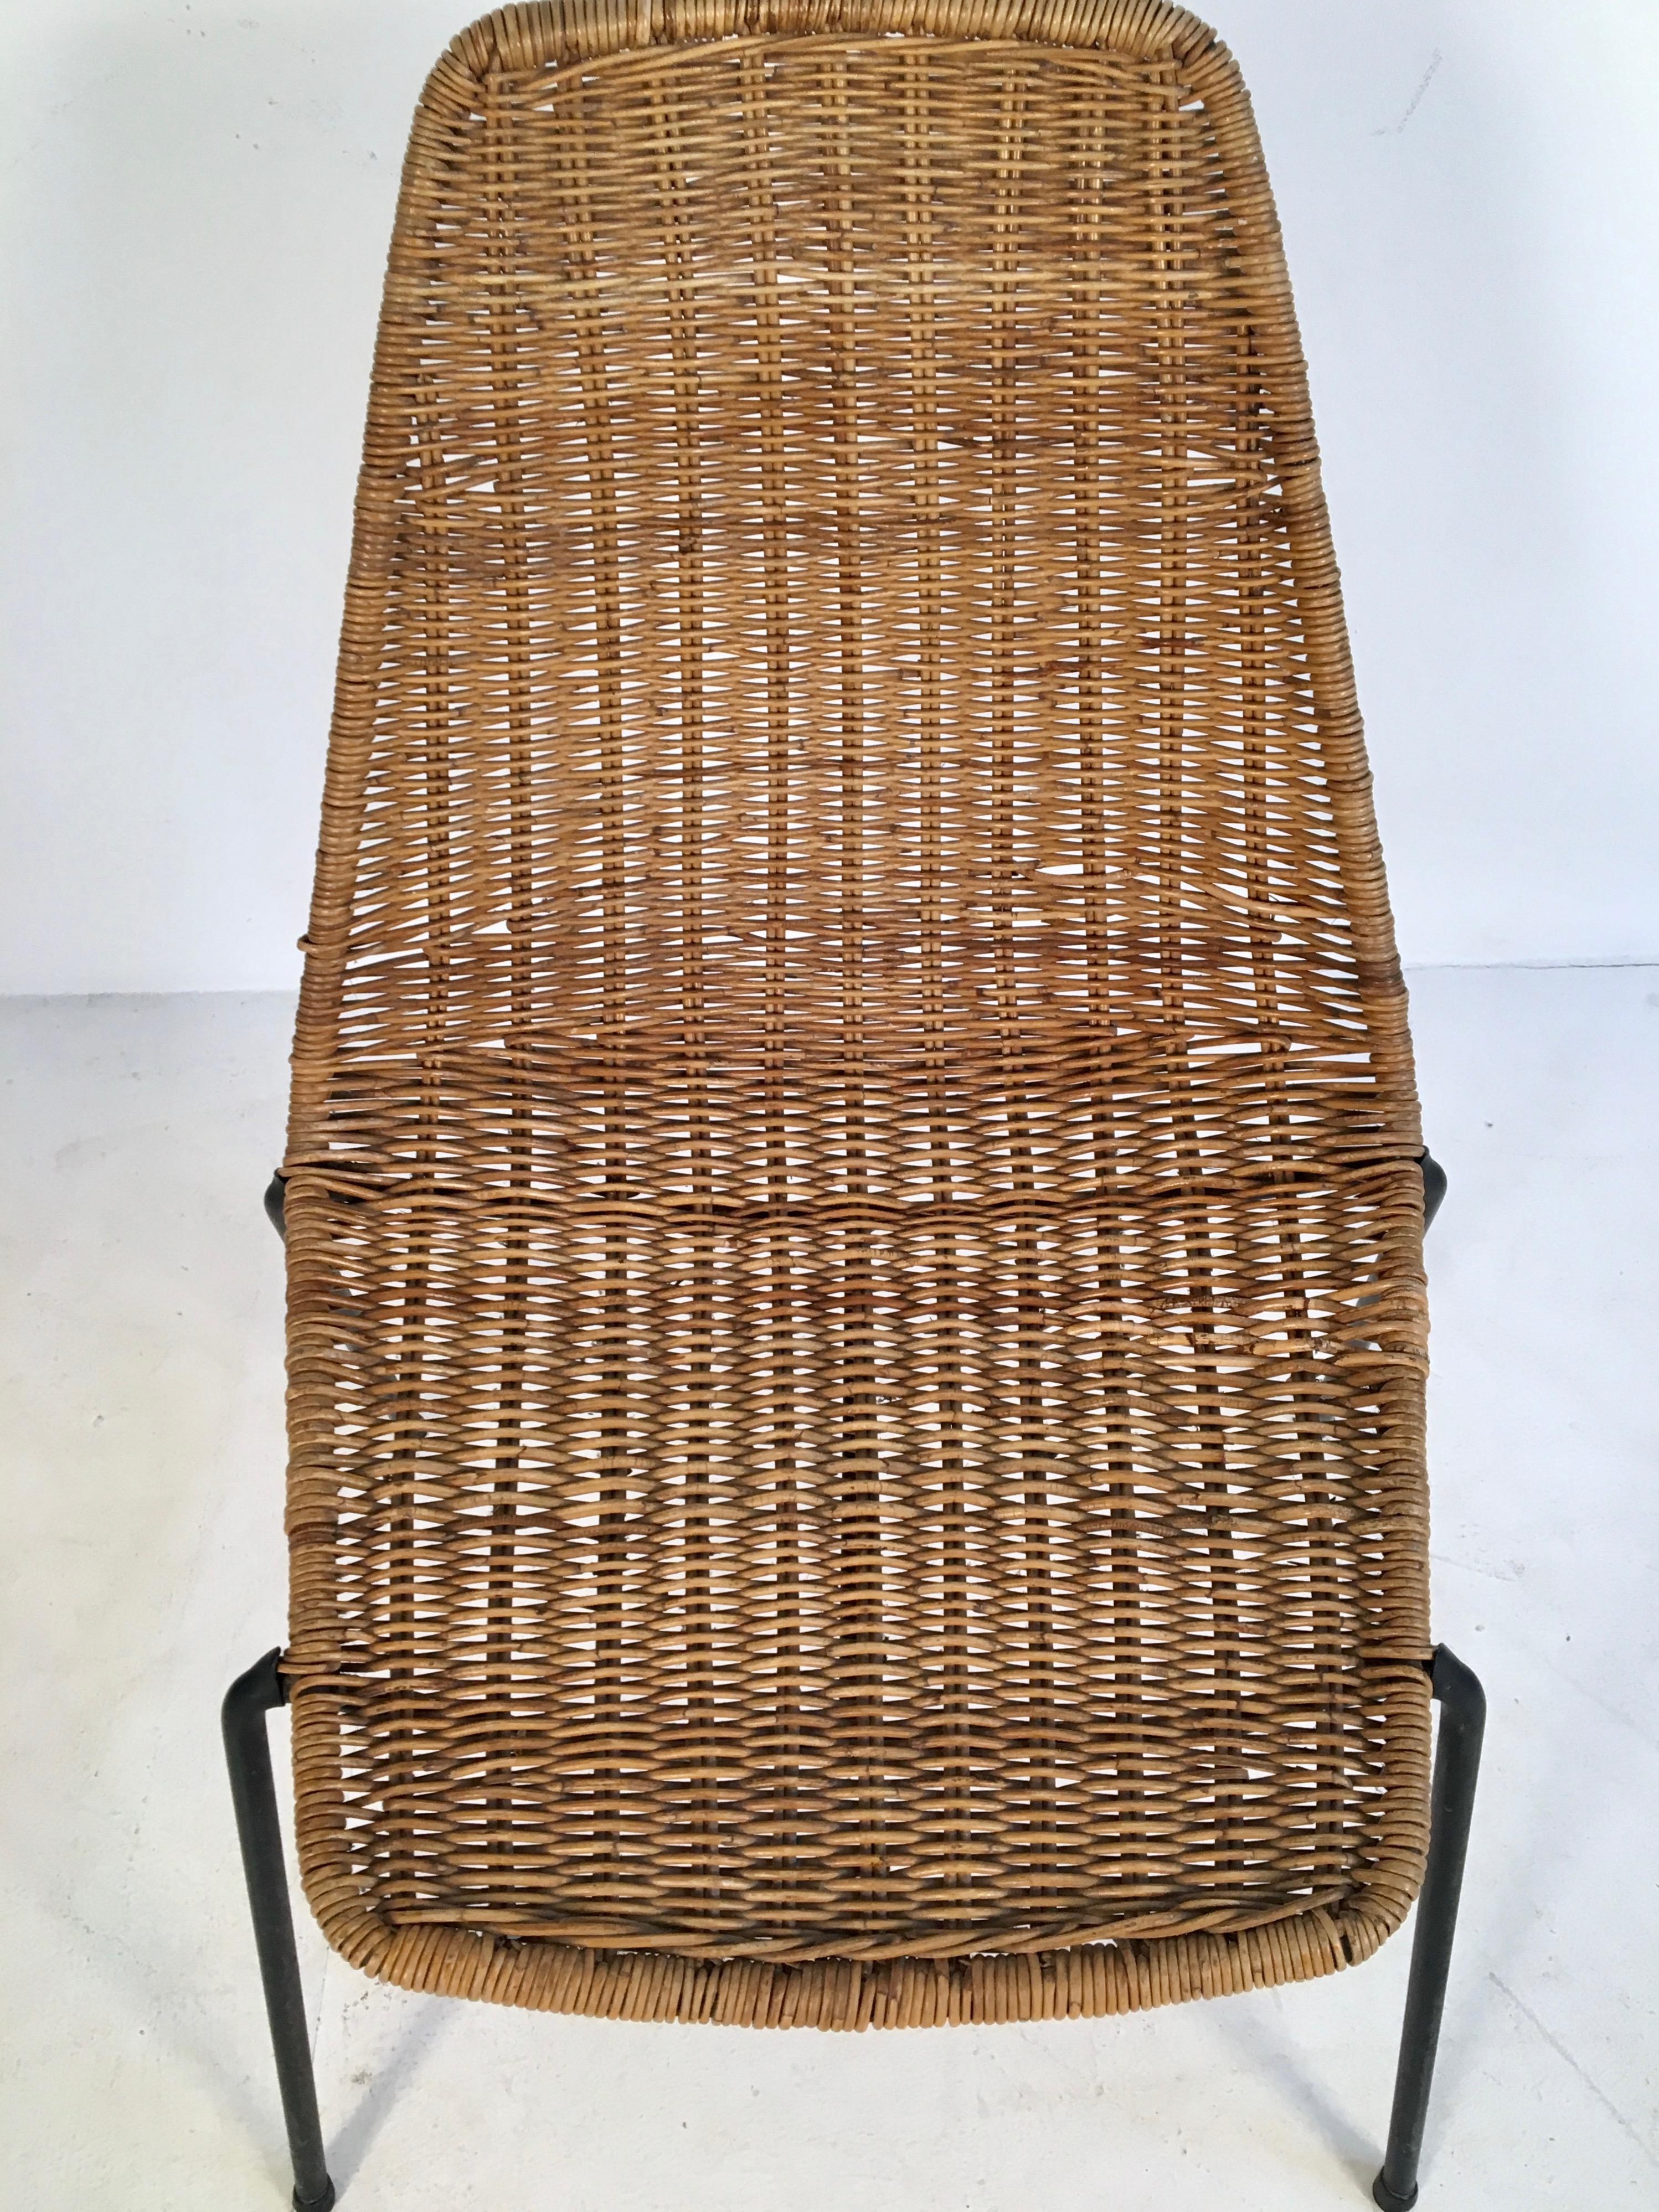 2 Midcentury Wicker Chairs by Campo & Graffi for Home Torino, Italy, circa 1950 For Sale 3